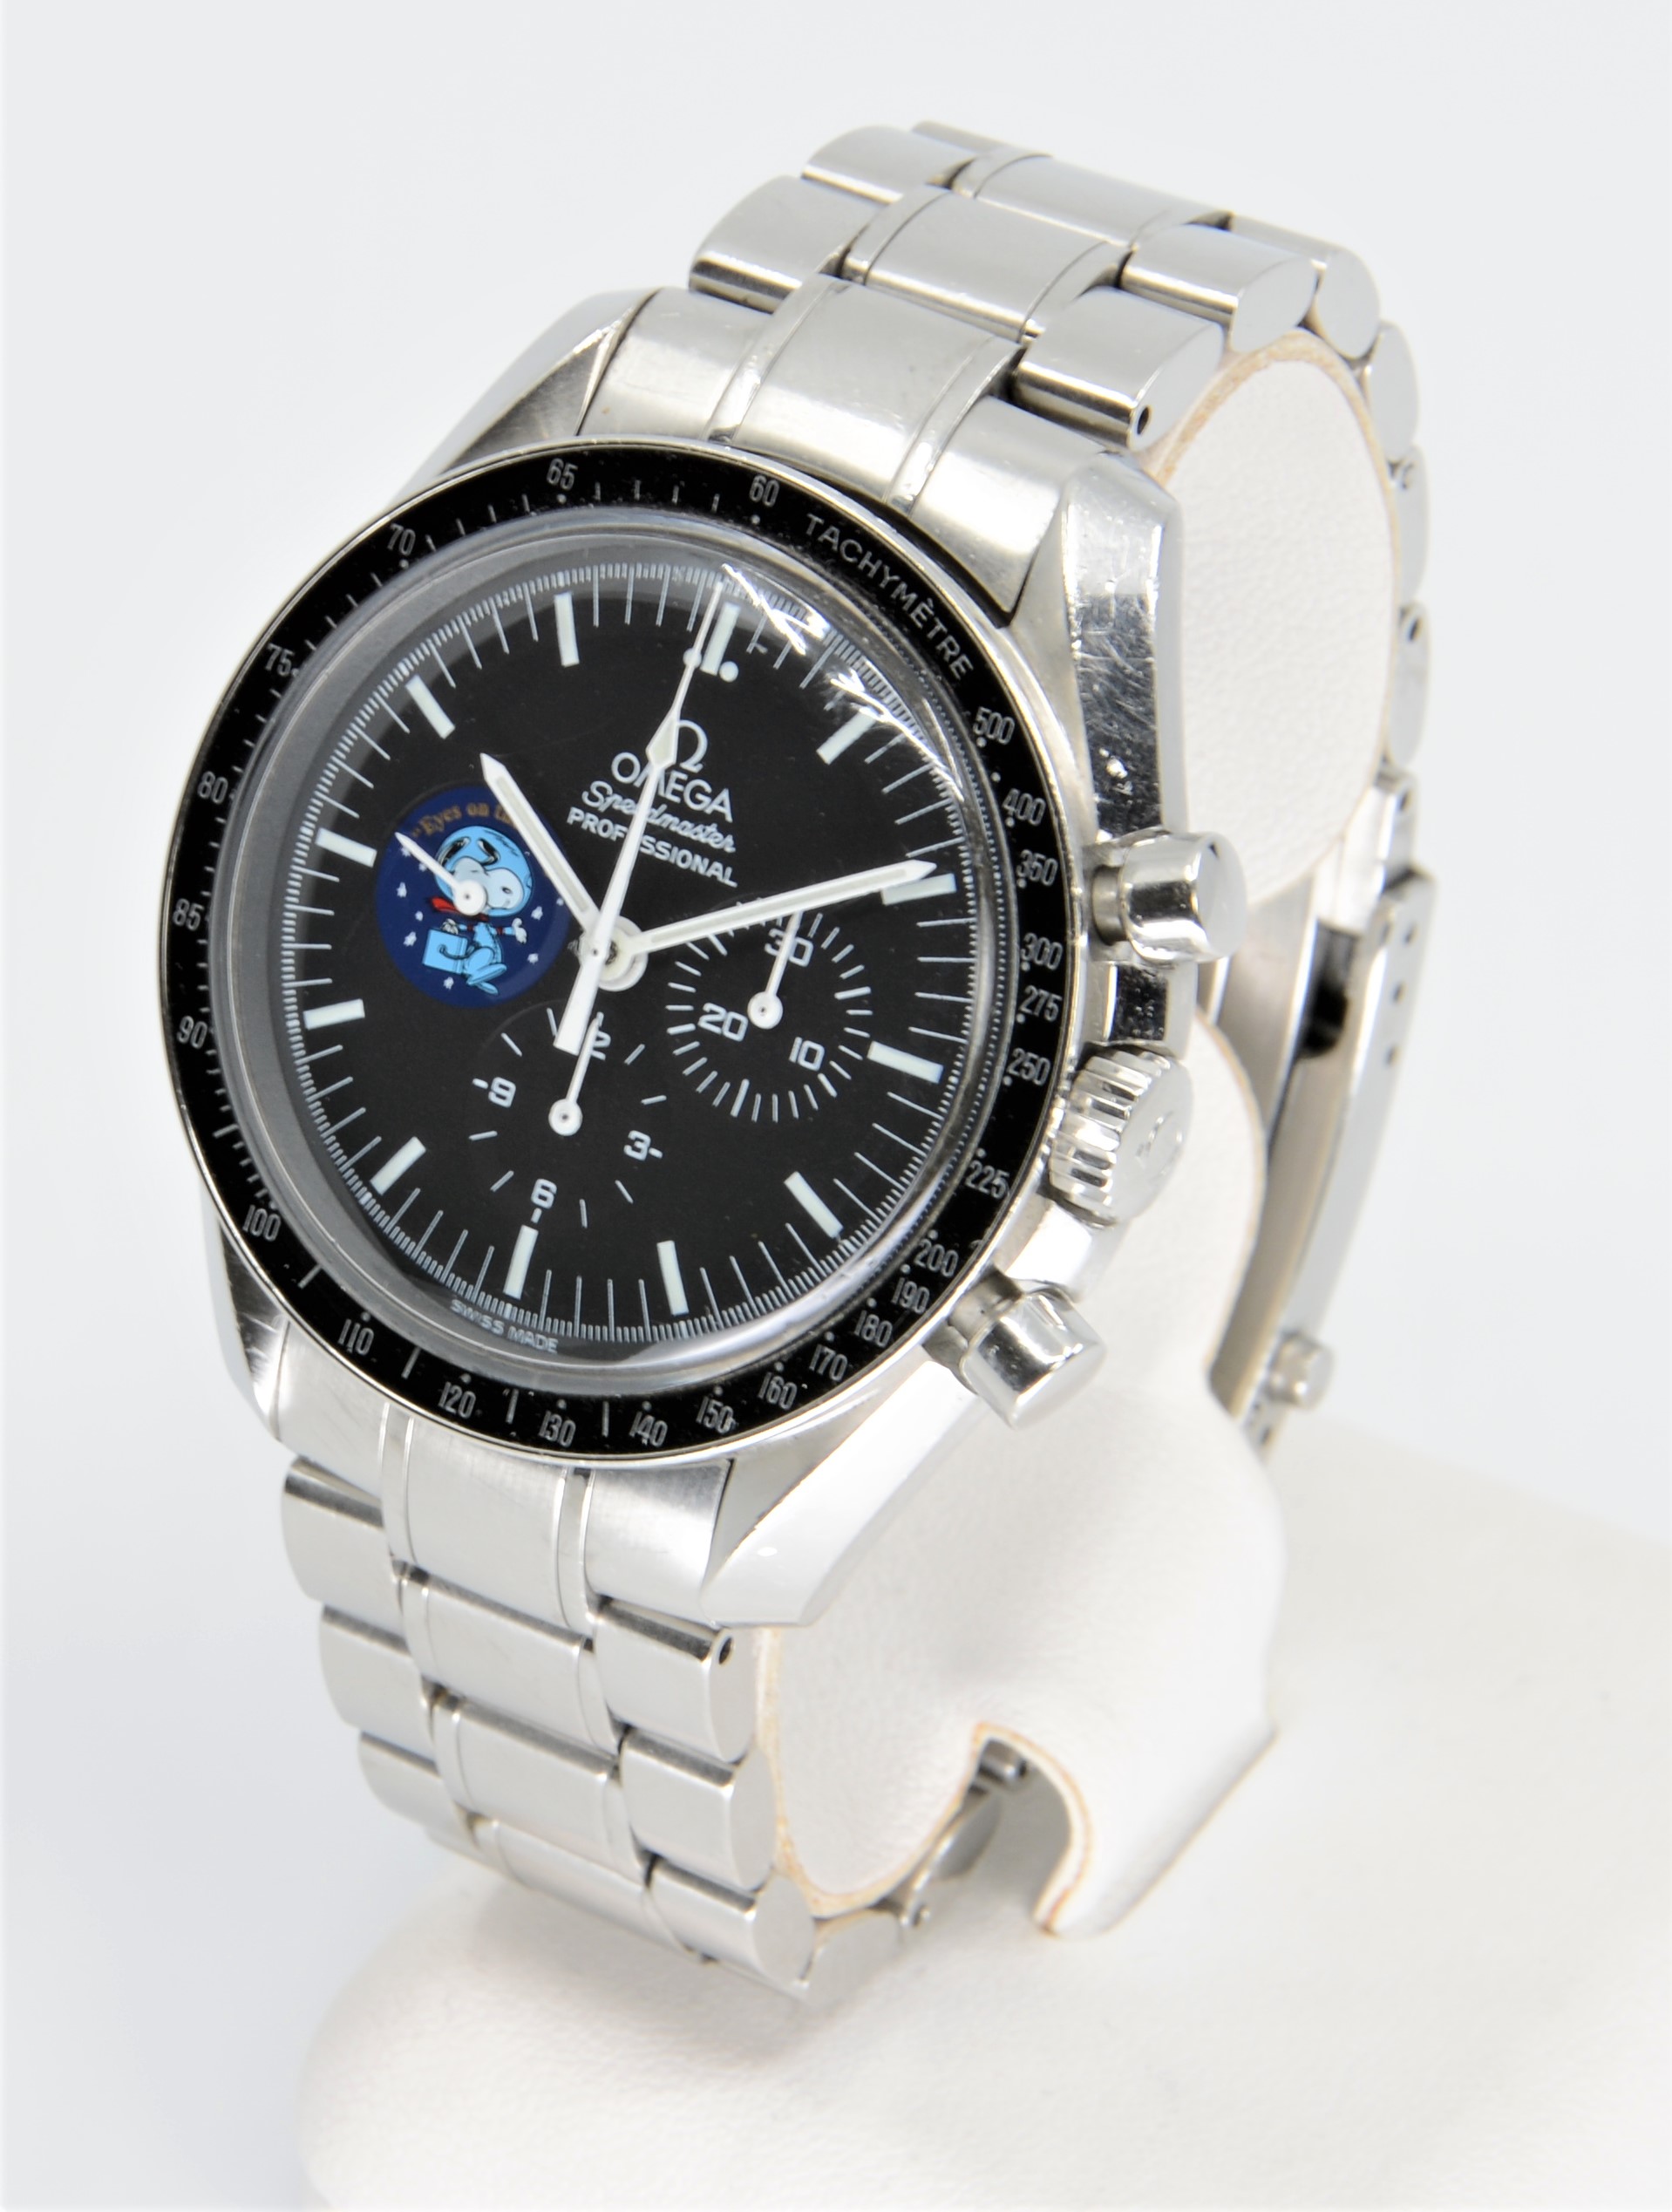 SPEEDMASTER SNOOPY "EYES ON THE STARS" LIMITED | Tawatch